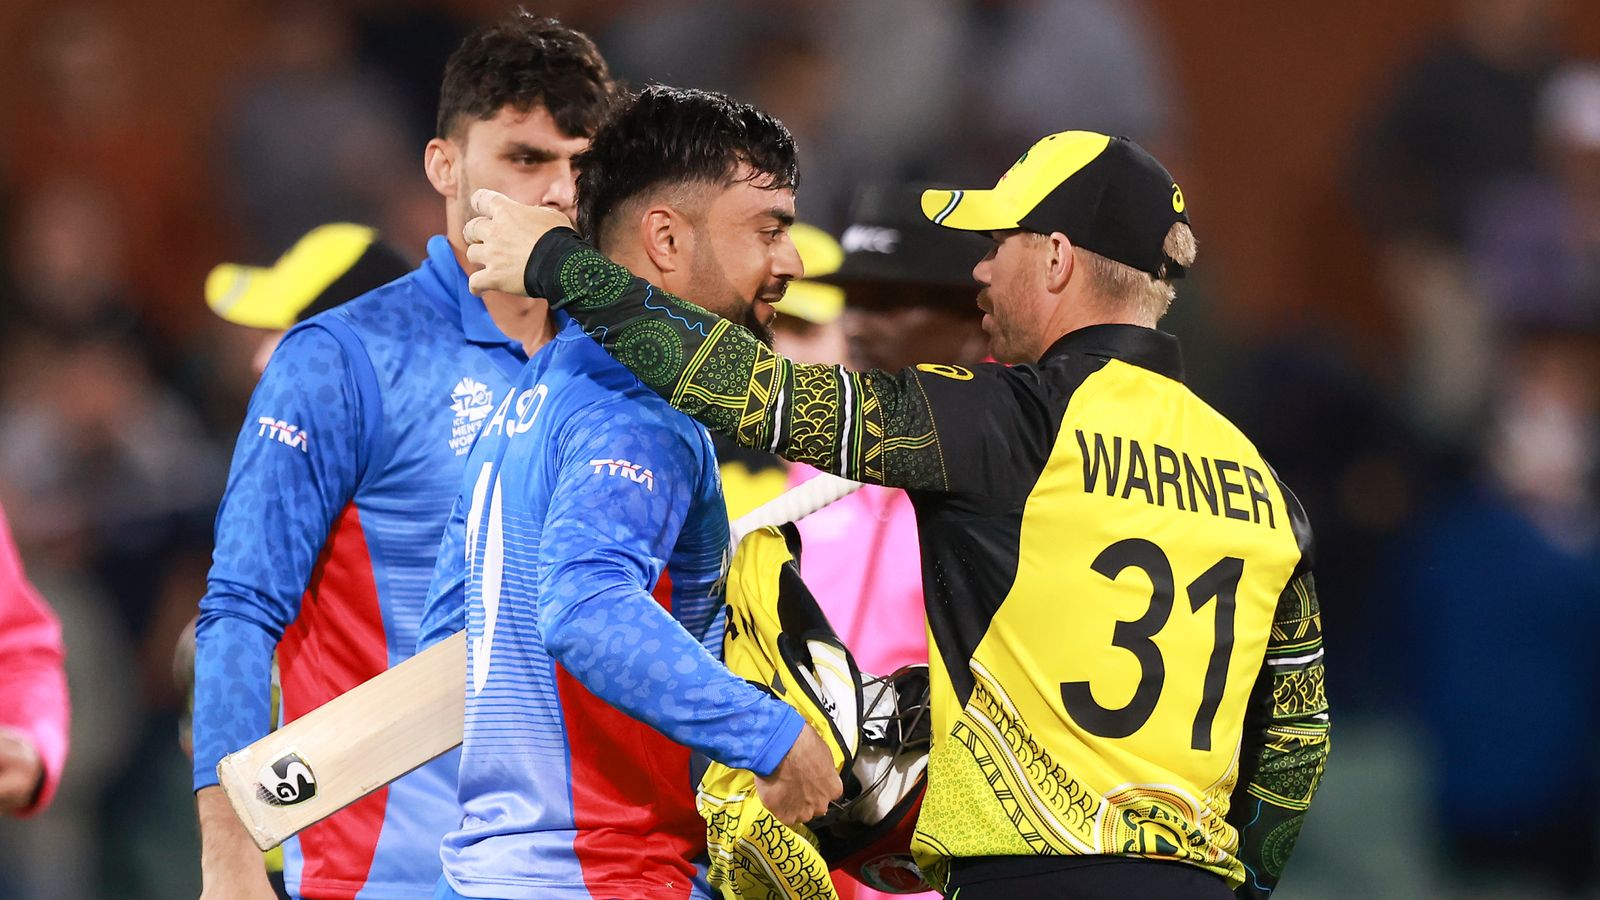 Australia men’s cricket team cancels Afghanistan matches over Taliban restrictions on women and girls’ freedoms